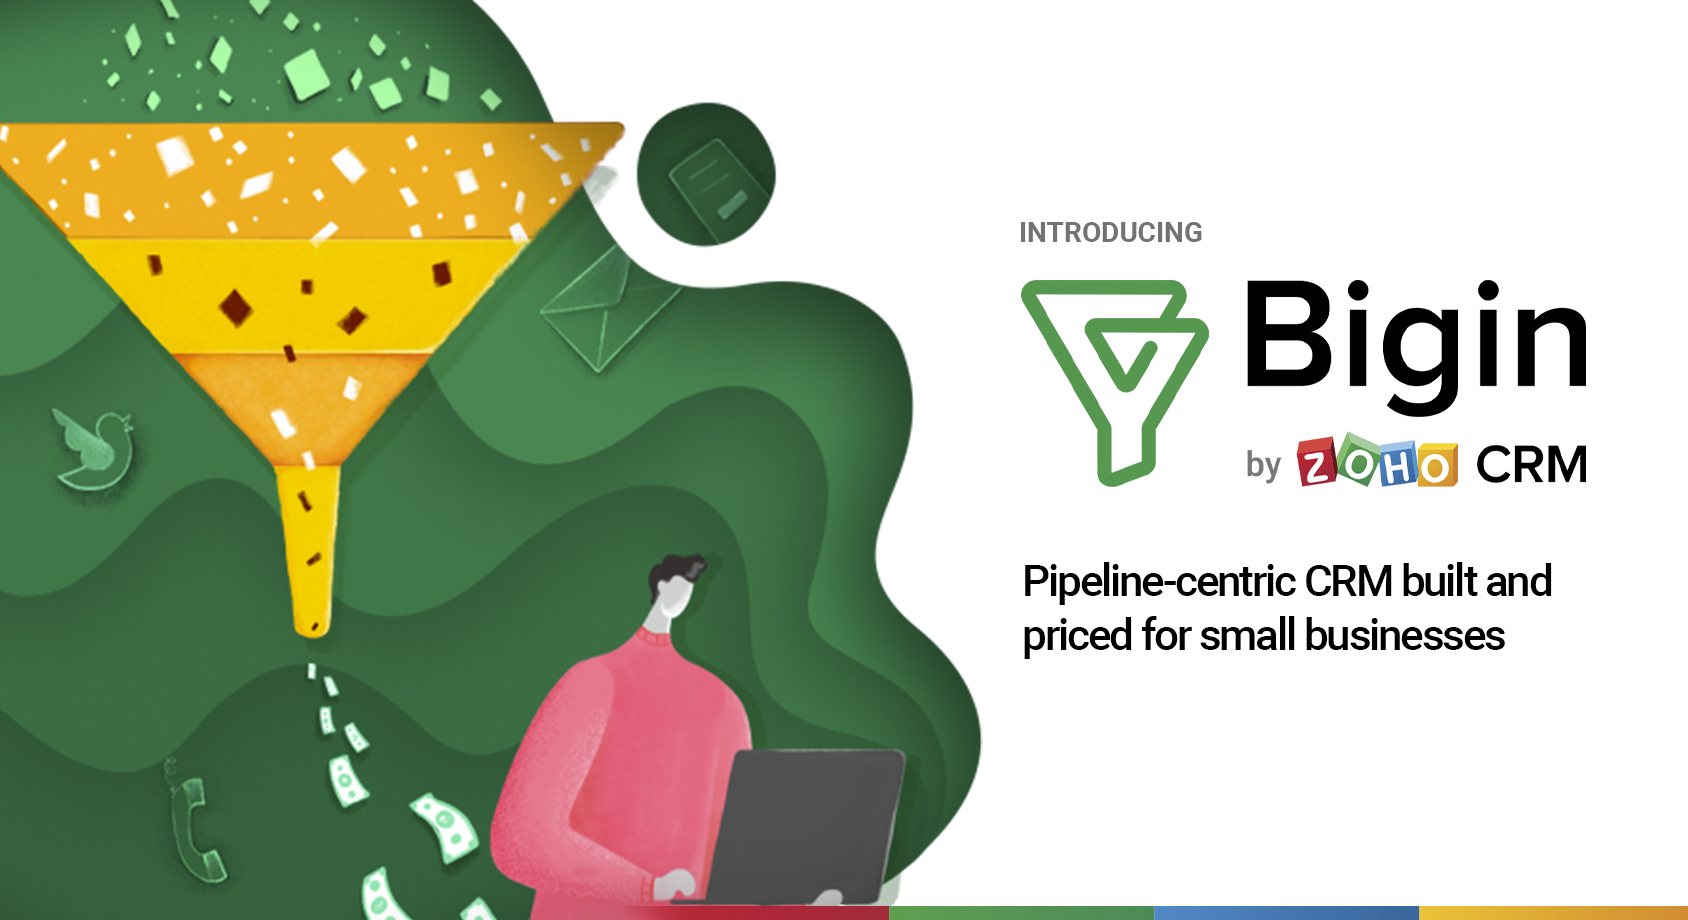 Zoho CRM introduces Bigin: A new pipeline-centric CRM built and priced for small businesses